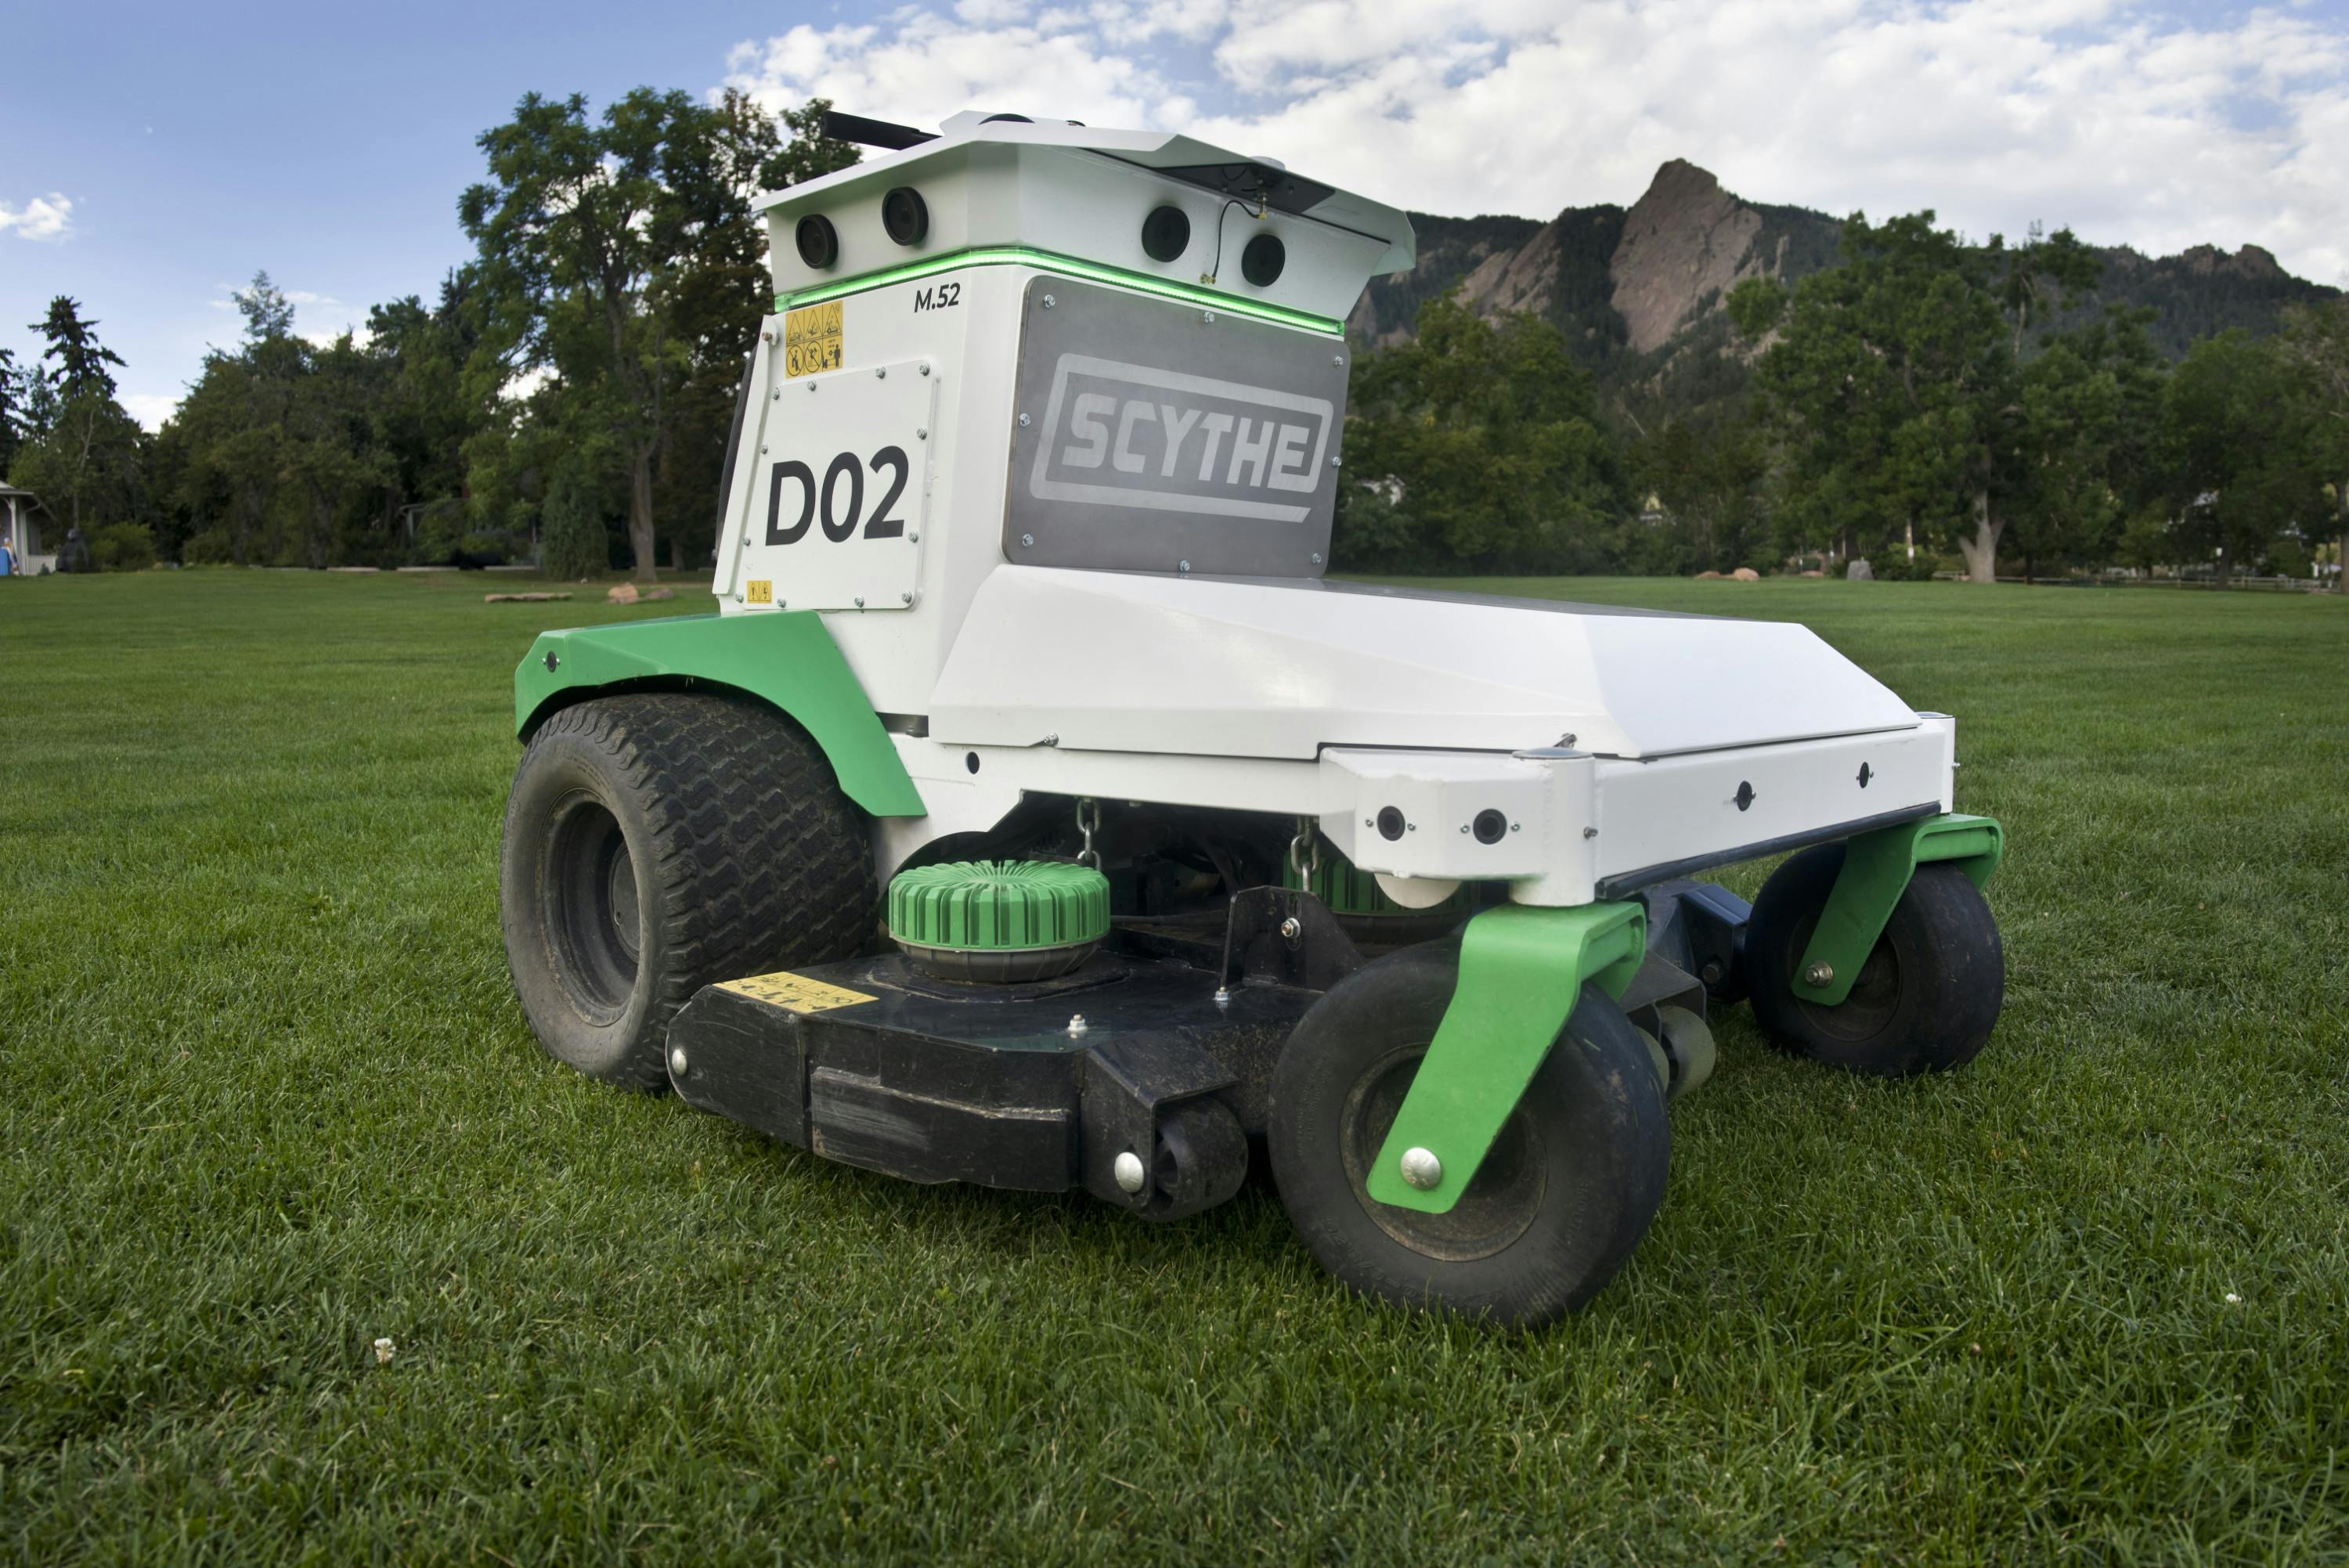 The Future of Mowing.